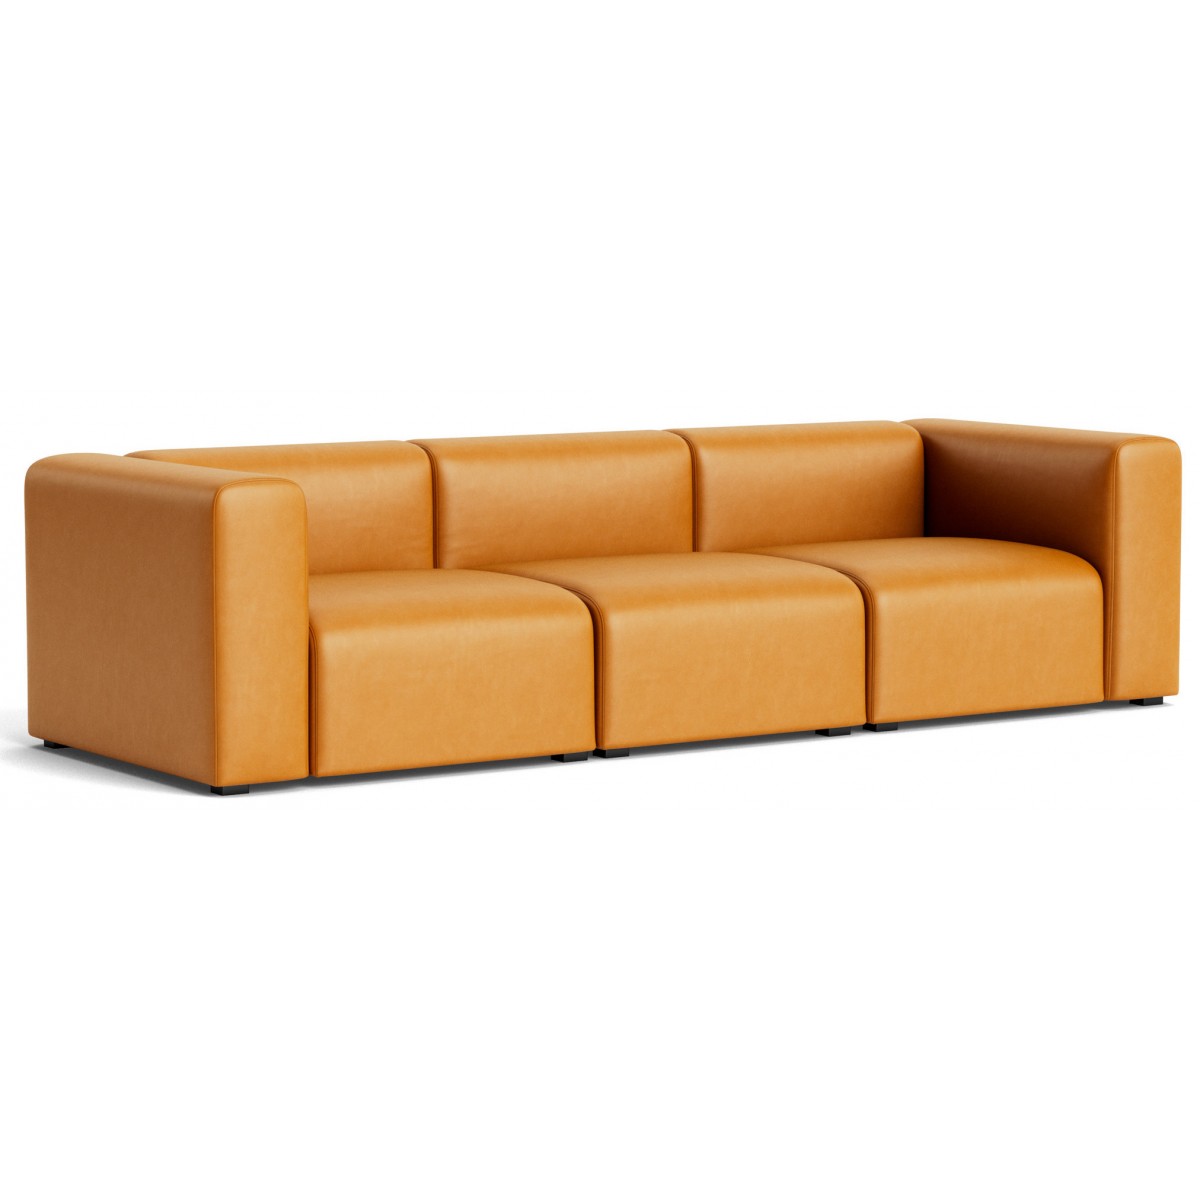 Sense cognac leather - Mags 3-seater – Comb. 1